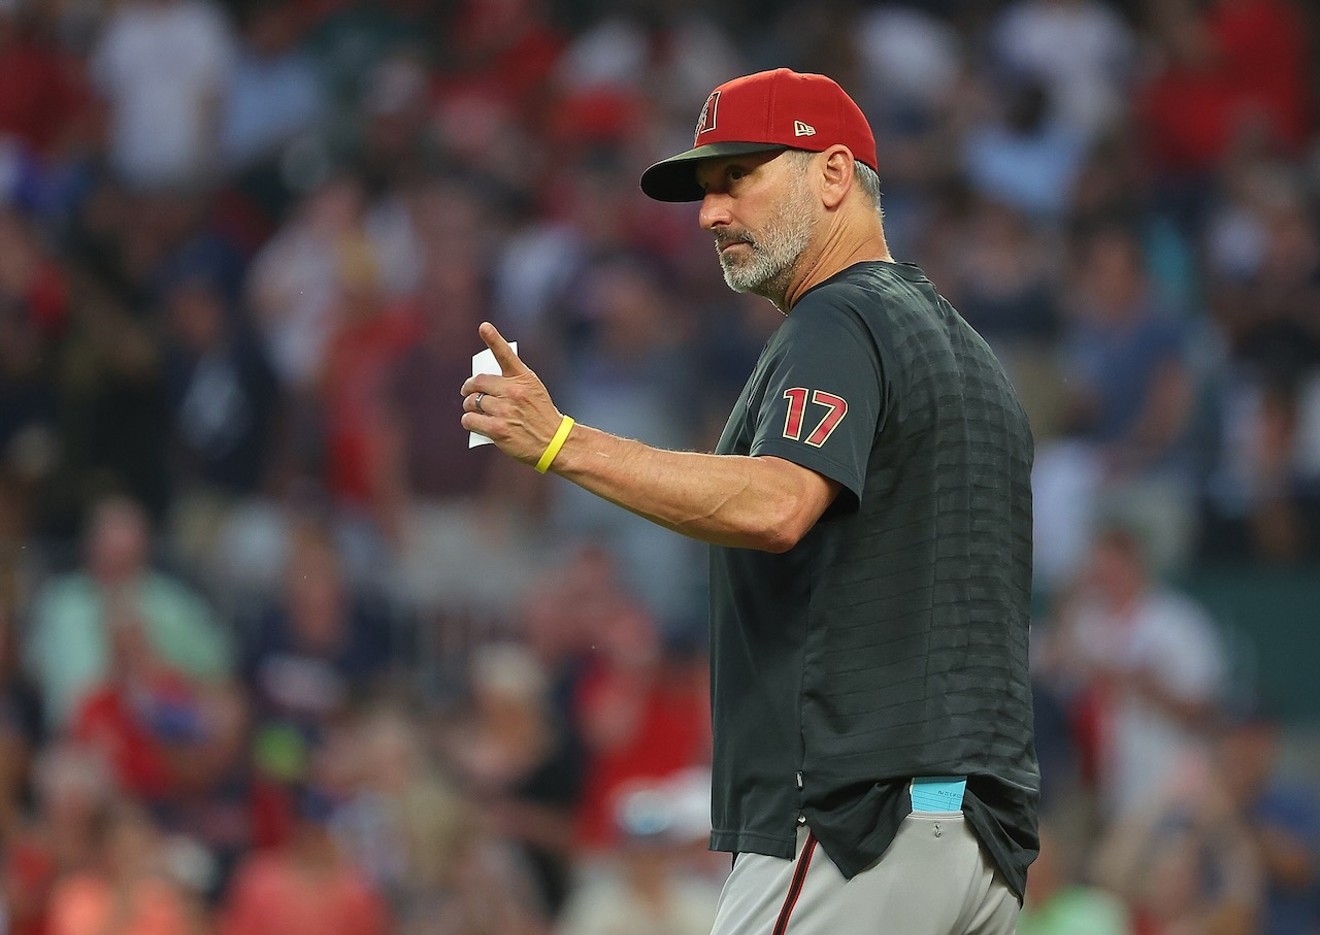 Can Torey Lovullo, the longest tenured Diamondback manager in history, get this team past the Wild Card series?